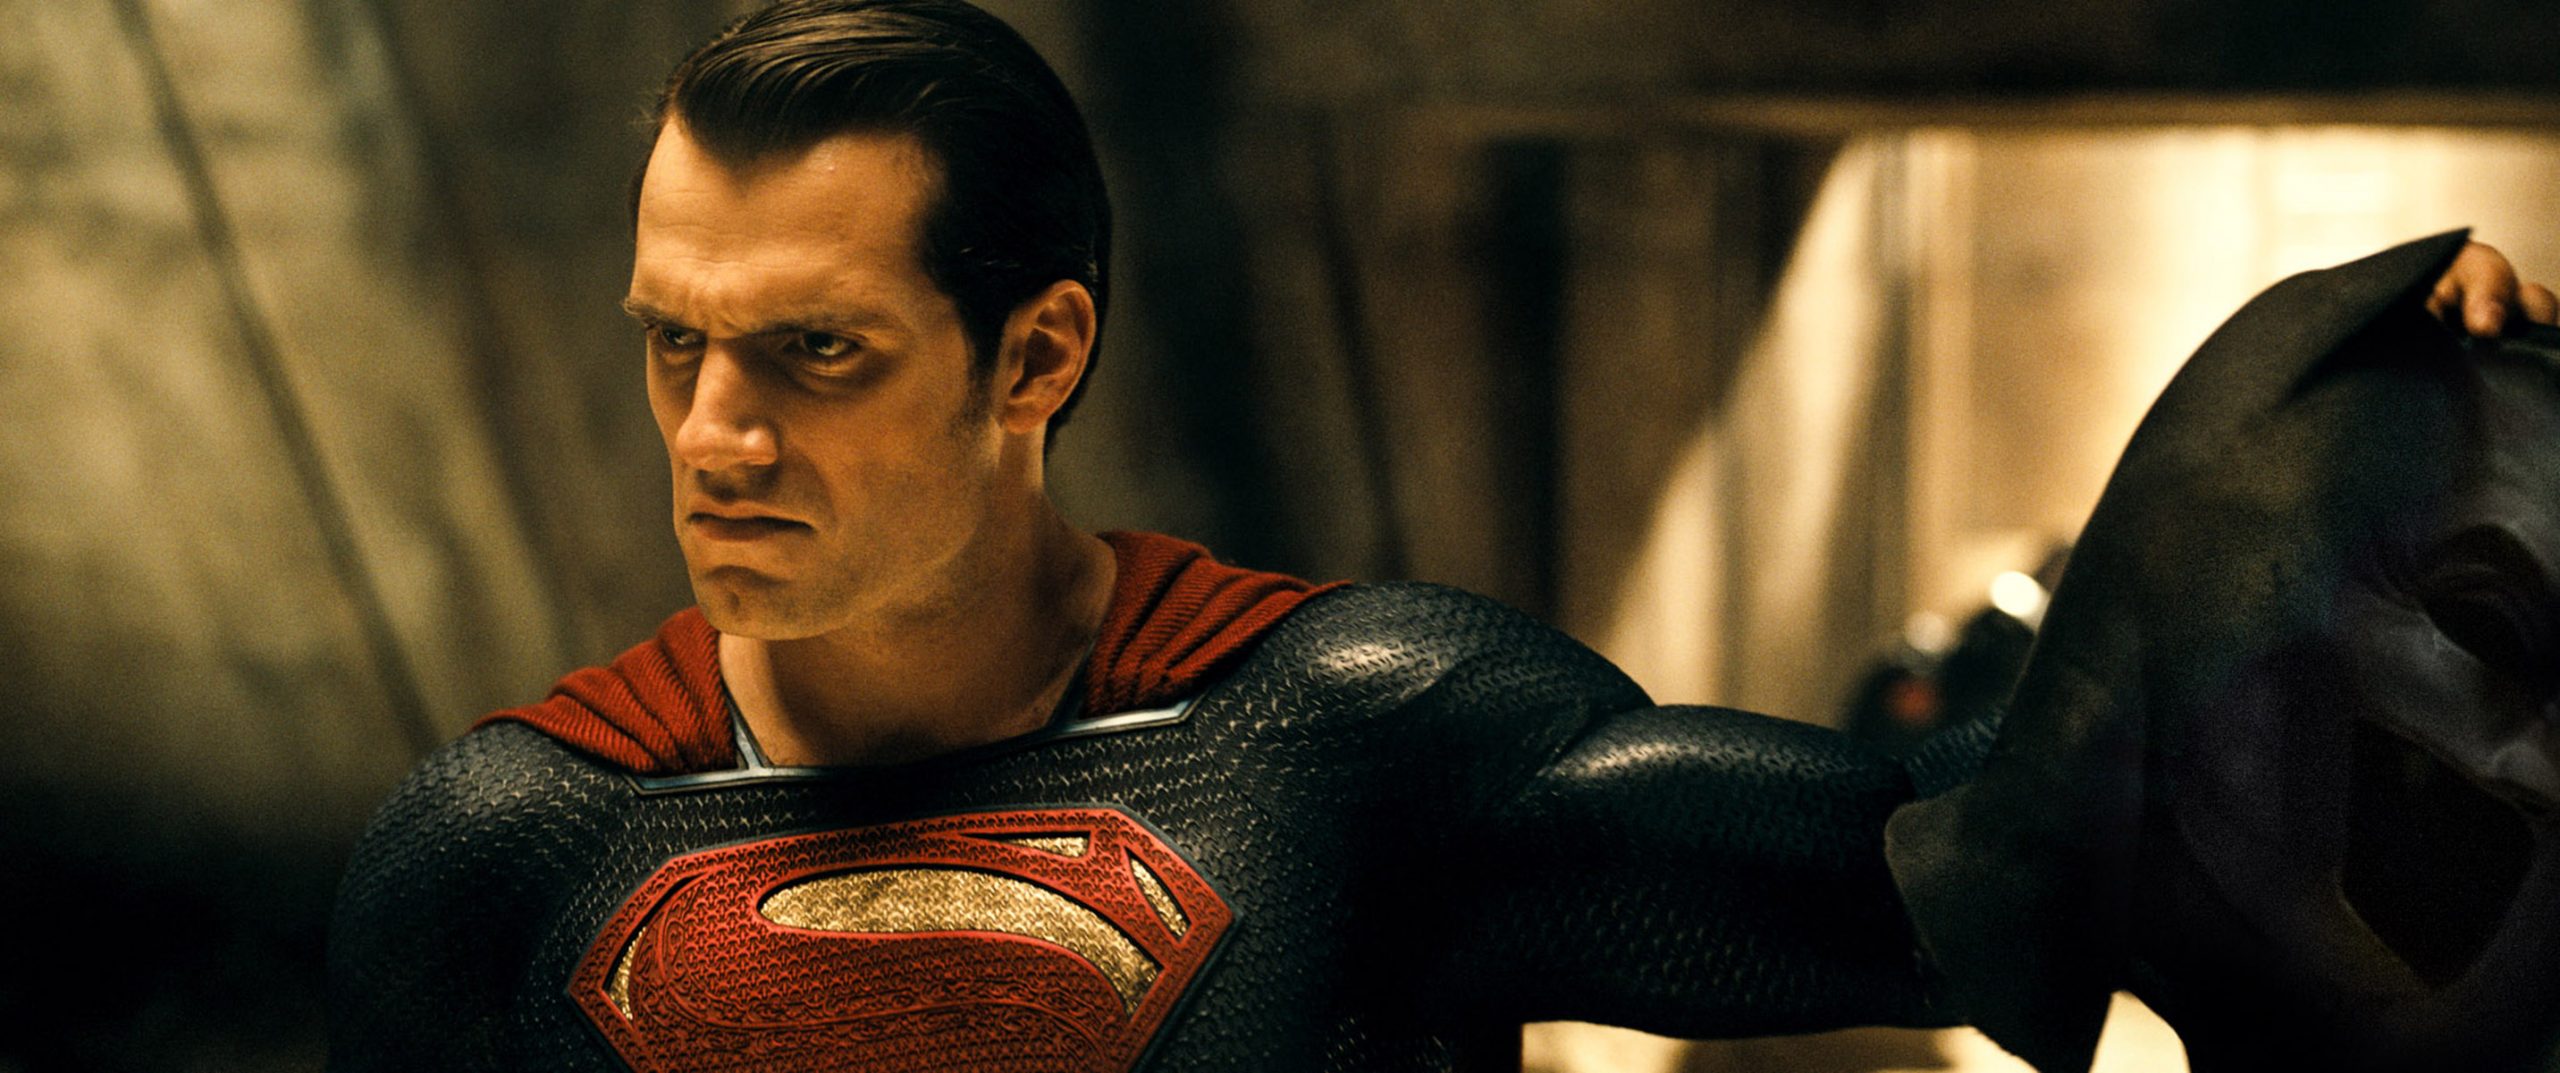 James Gunn HAS discussed a DCU role for Henry Cavill. However it's not the one rumored lately on the Barside Buzz.